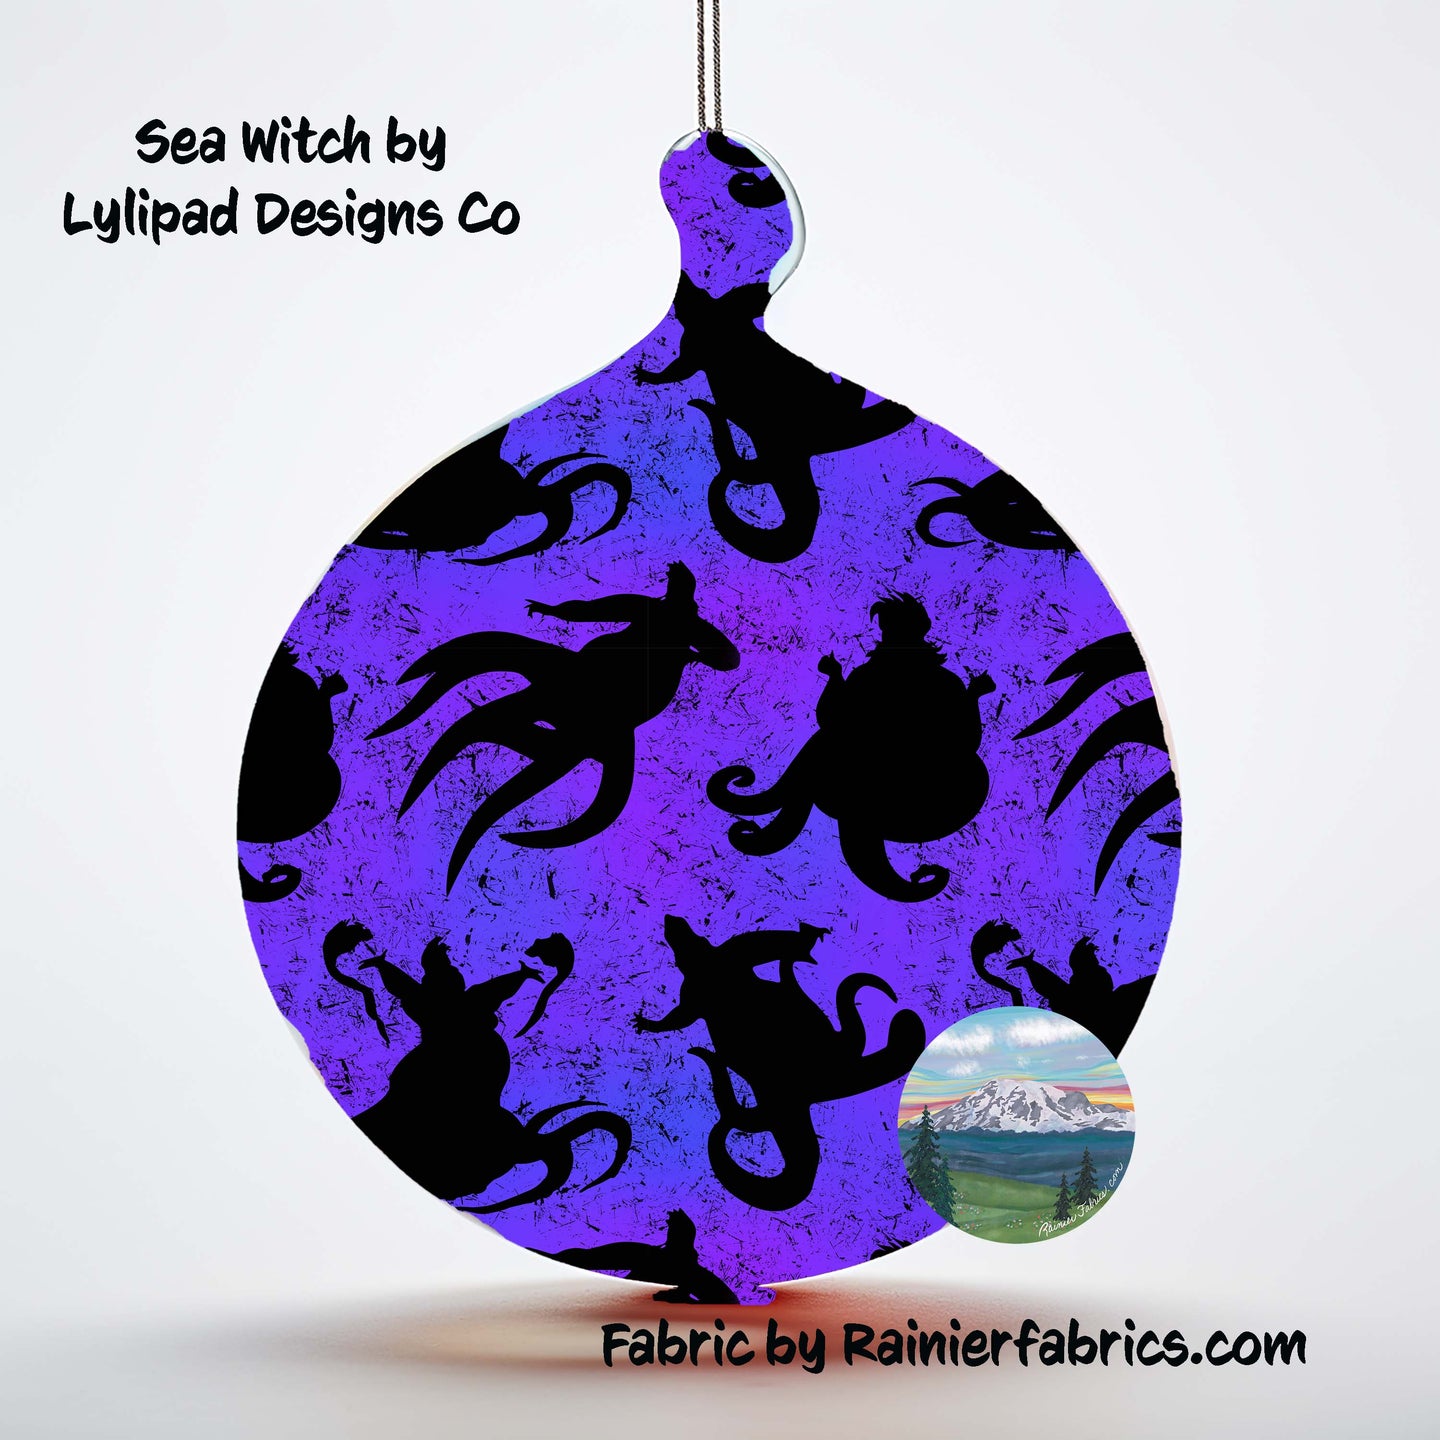 Sea Witch and Shells by Lylipad Designs Co